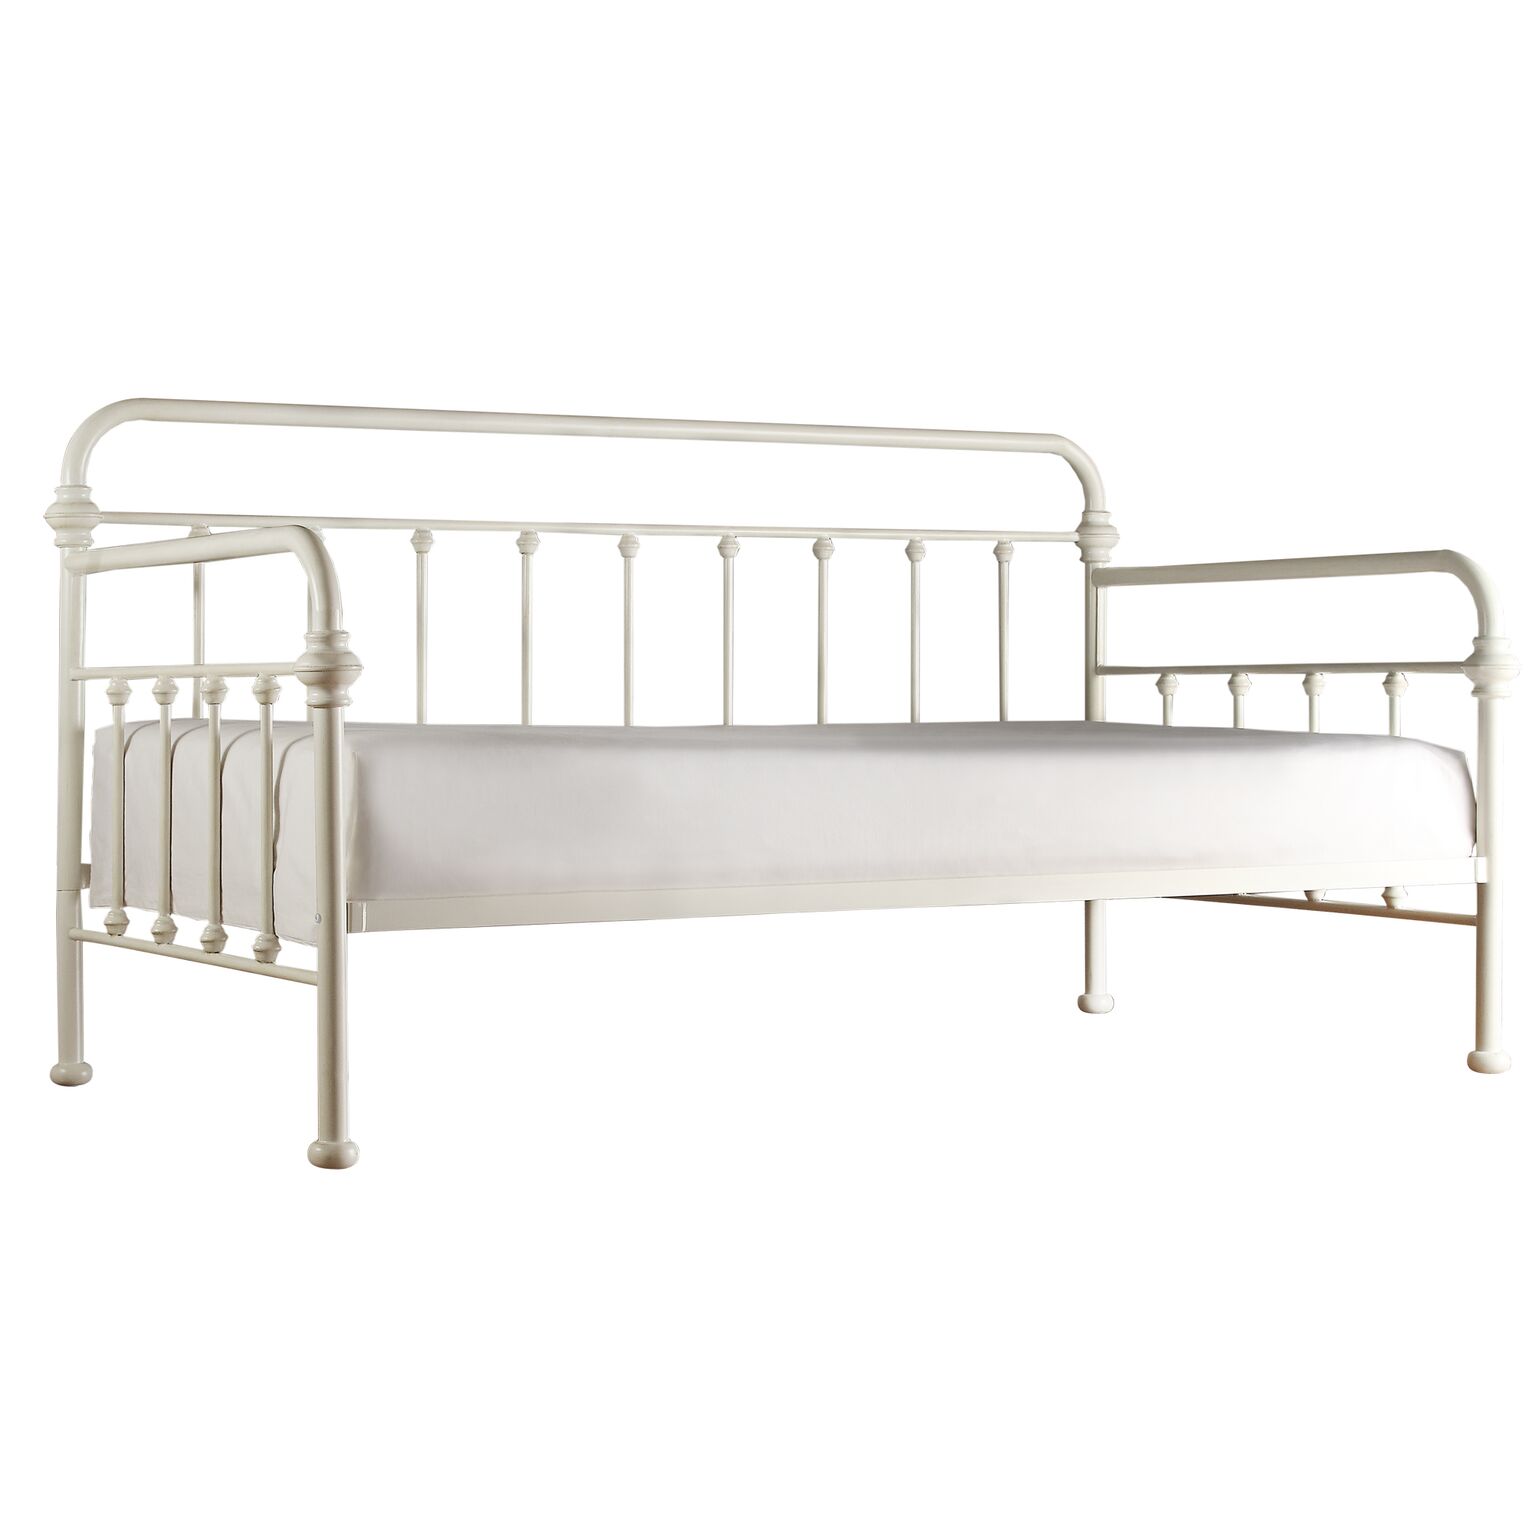 Weston Home Nottingham Metal Twin Daybed, Antique White - image 1 of 7